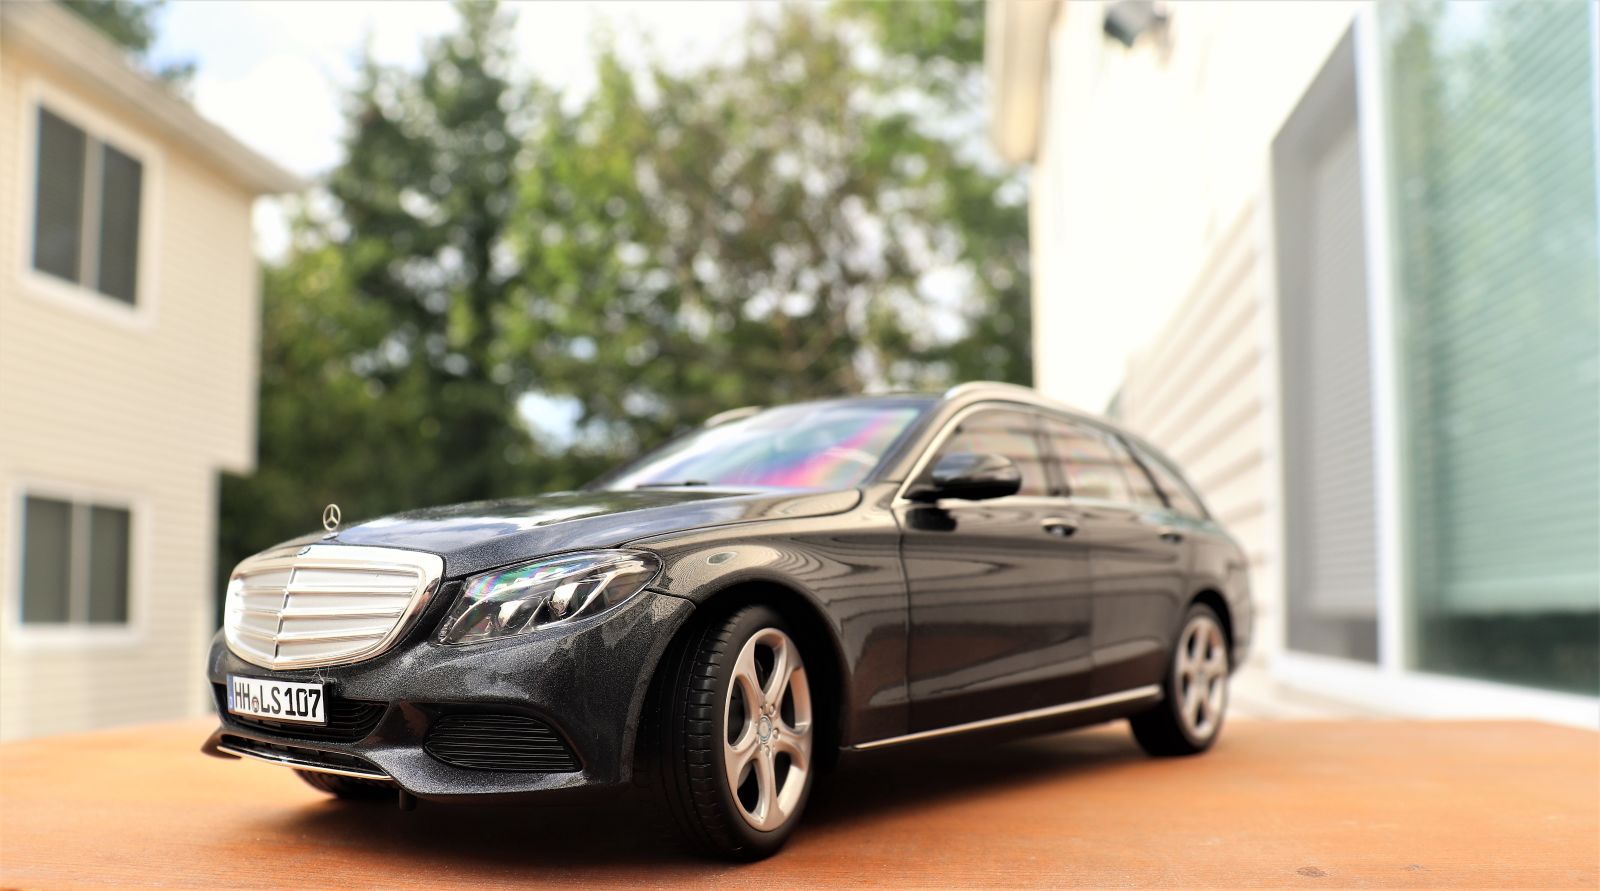 Illustration for article titled 1/18 Mercedes Benz S205 C-Class Wagon